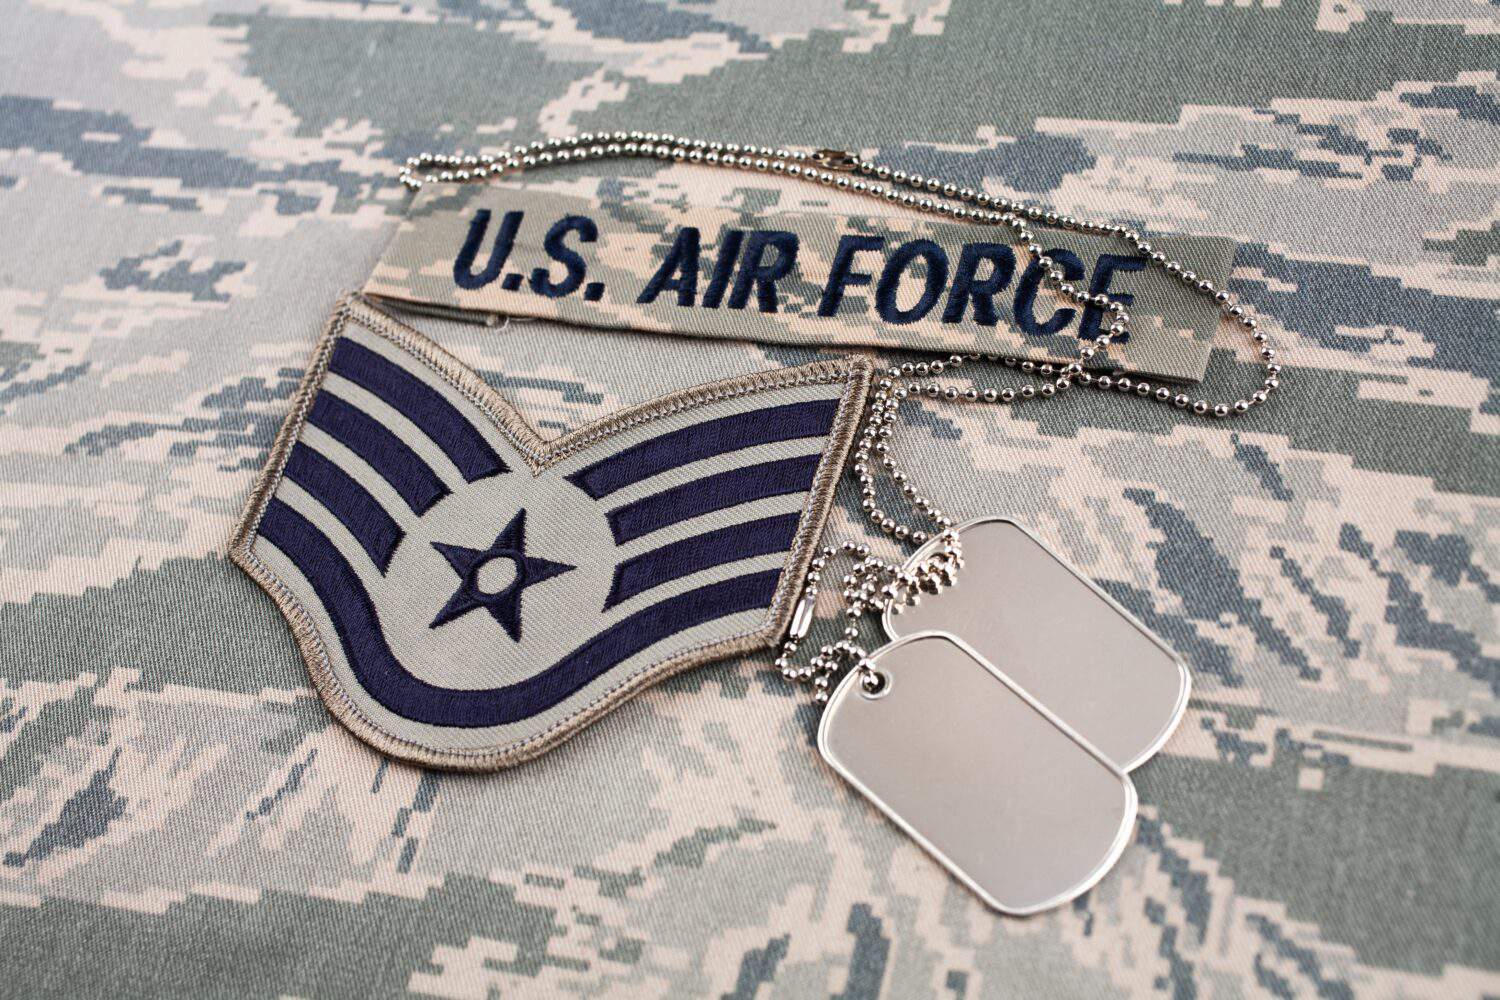 US AIR FORCE branch tape and Staff Sergeant rank patch and dog tags on digital tiger stripe pattern Airman Battle Uniform (ABU) background